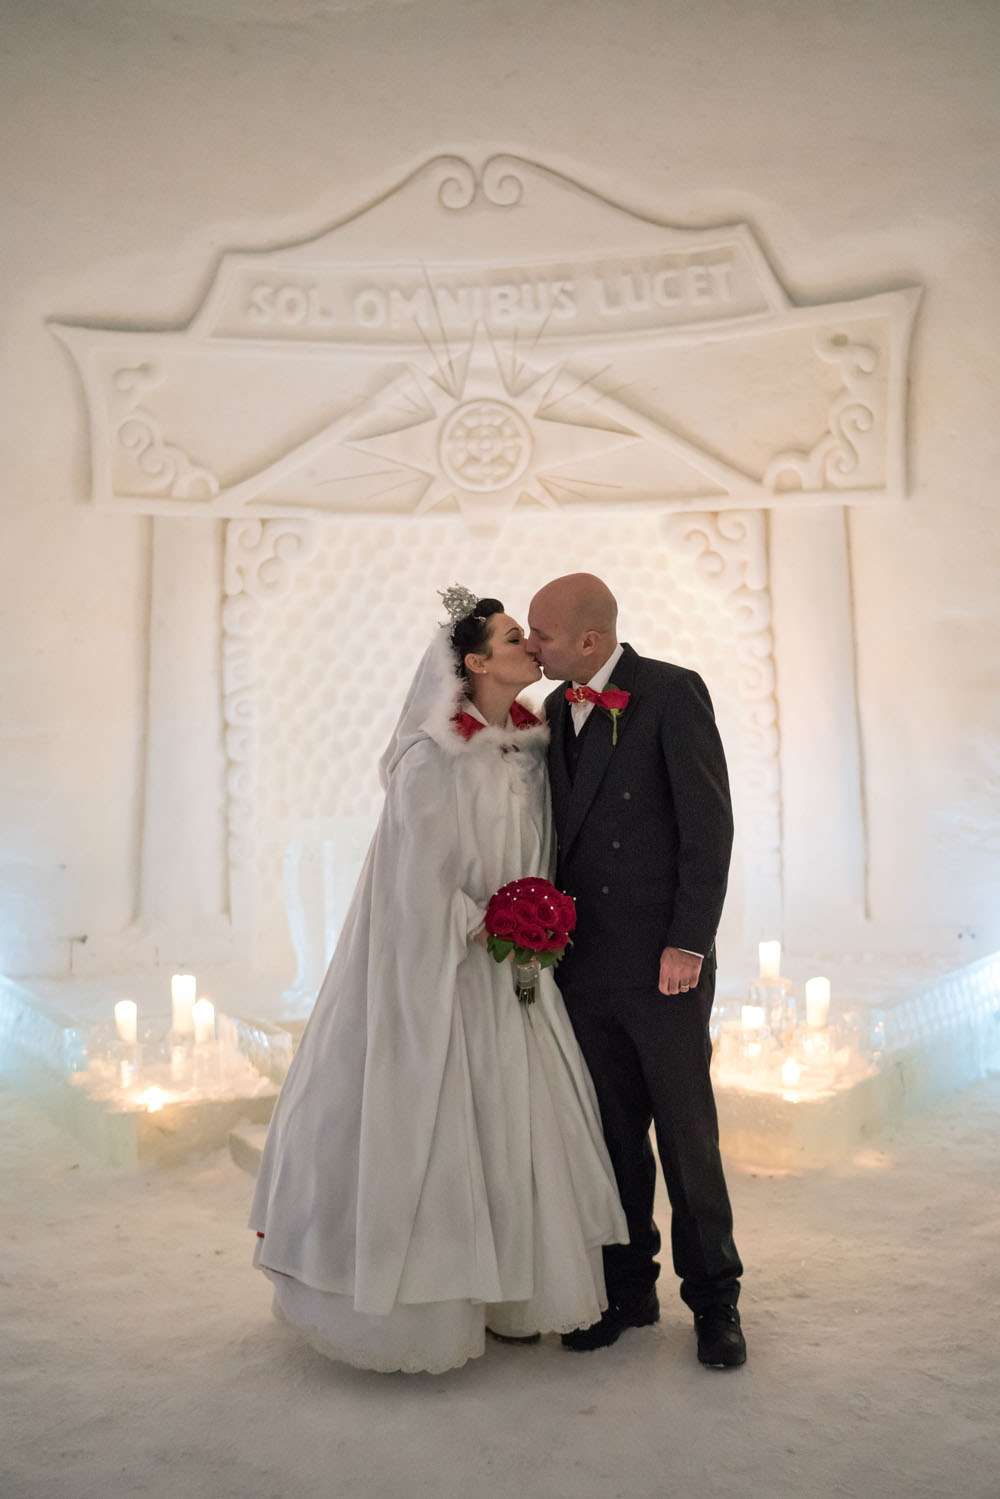 Lapland Wedding in an Ice Chapel (18)